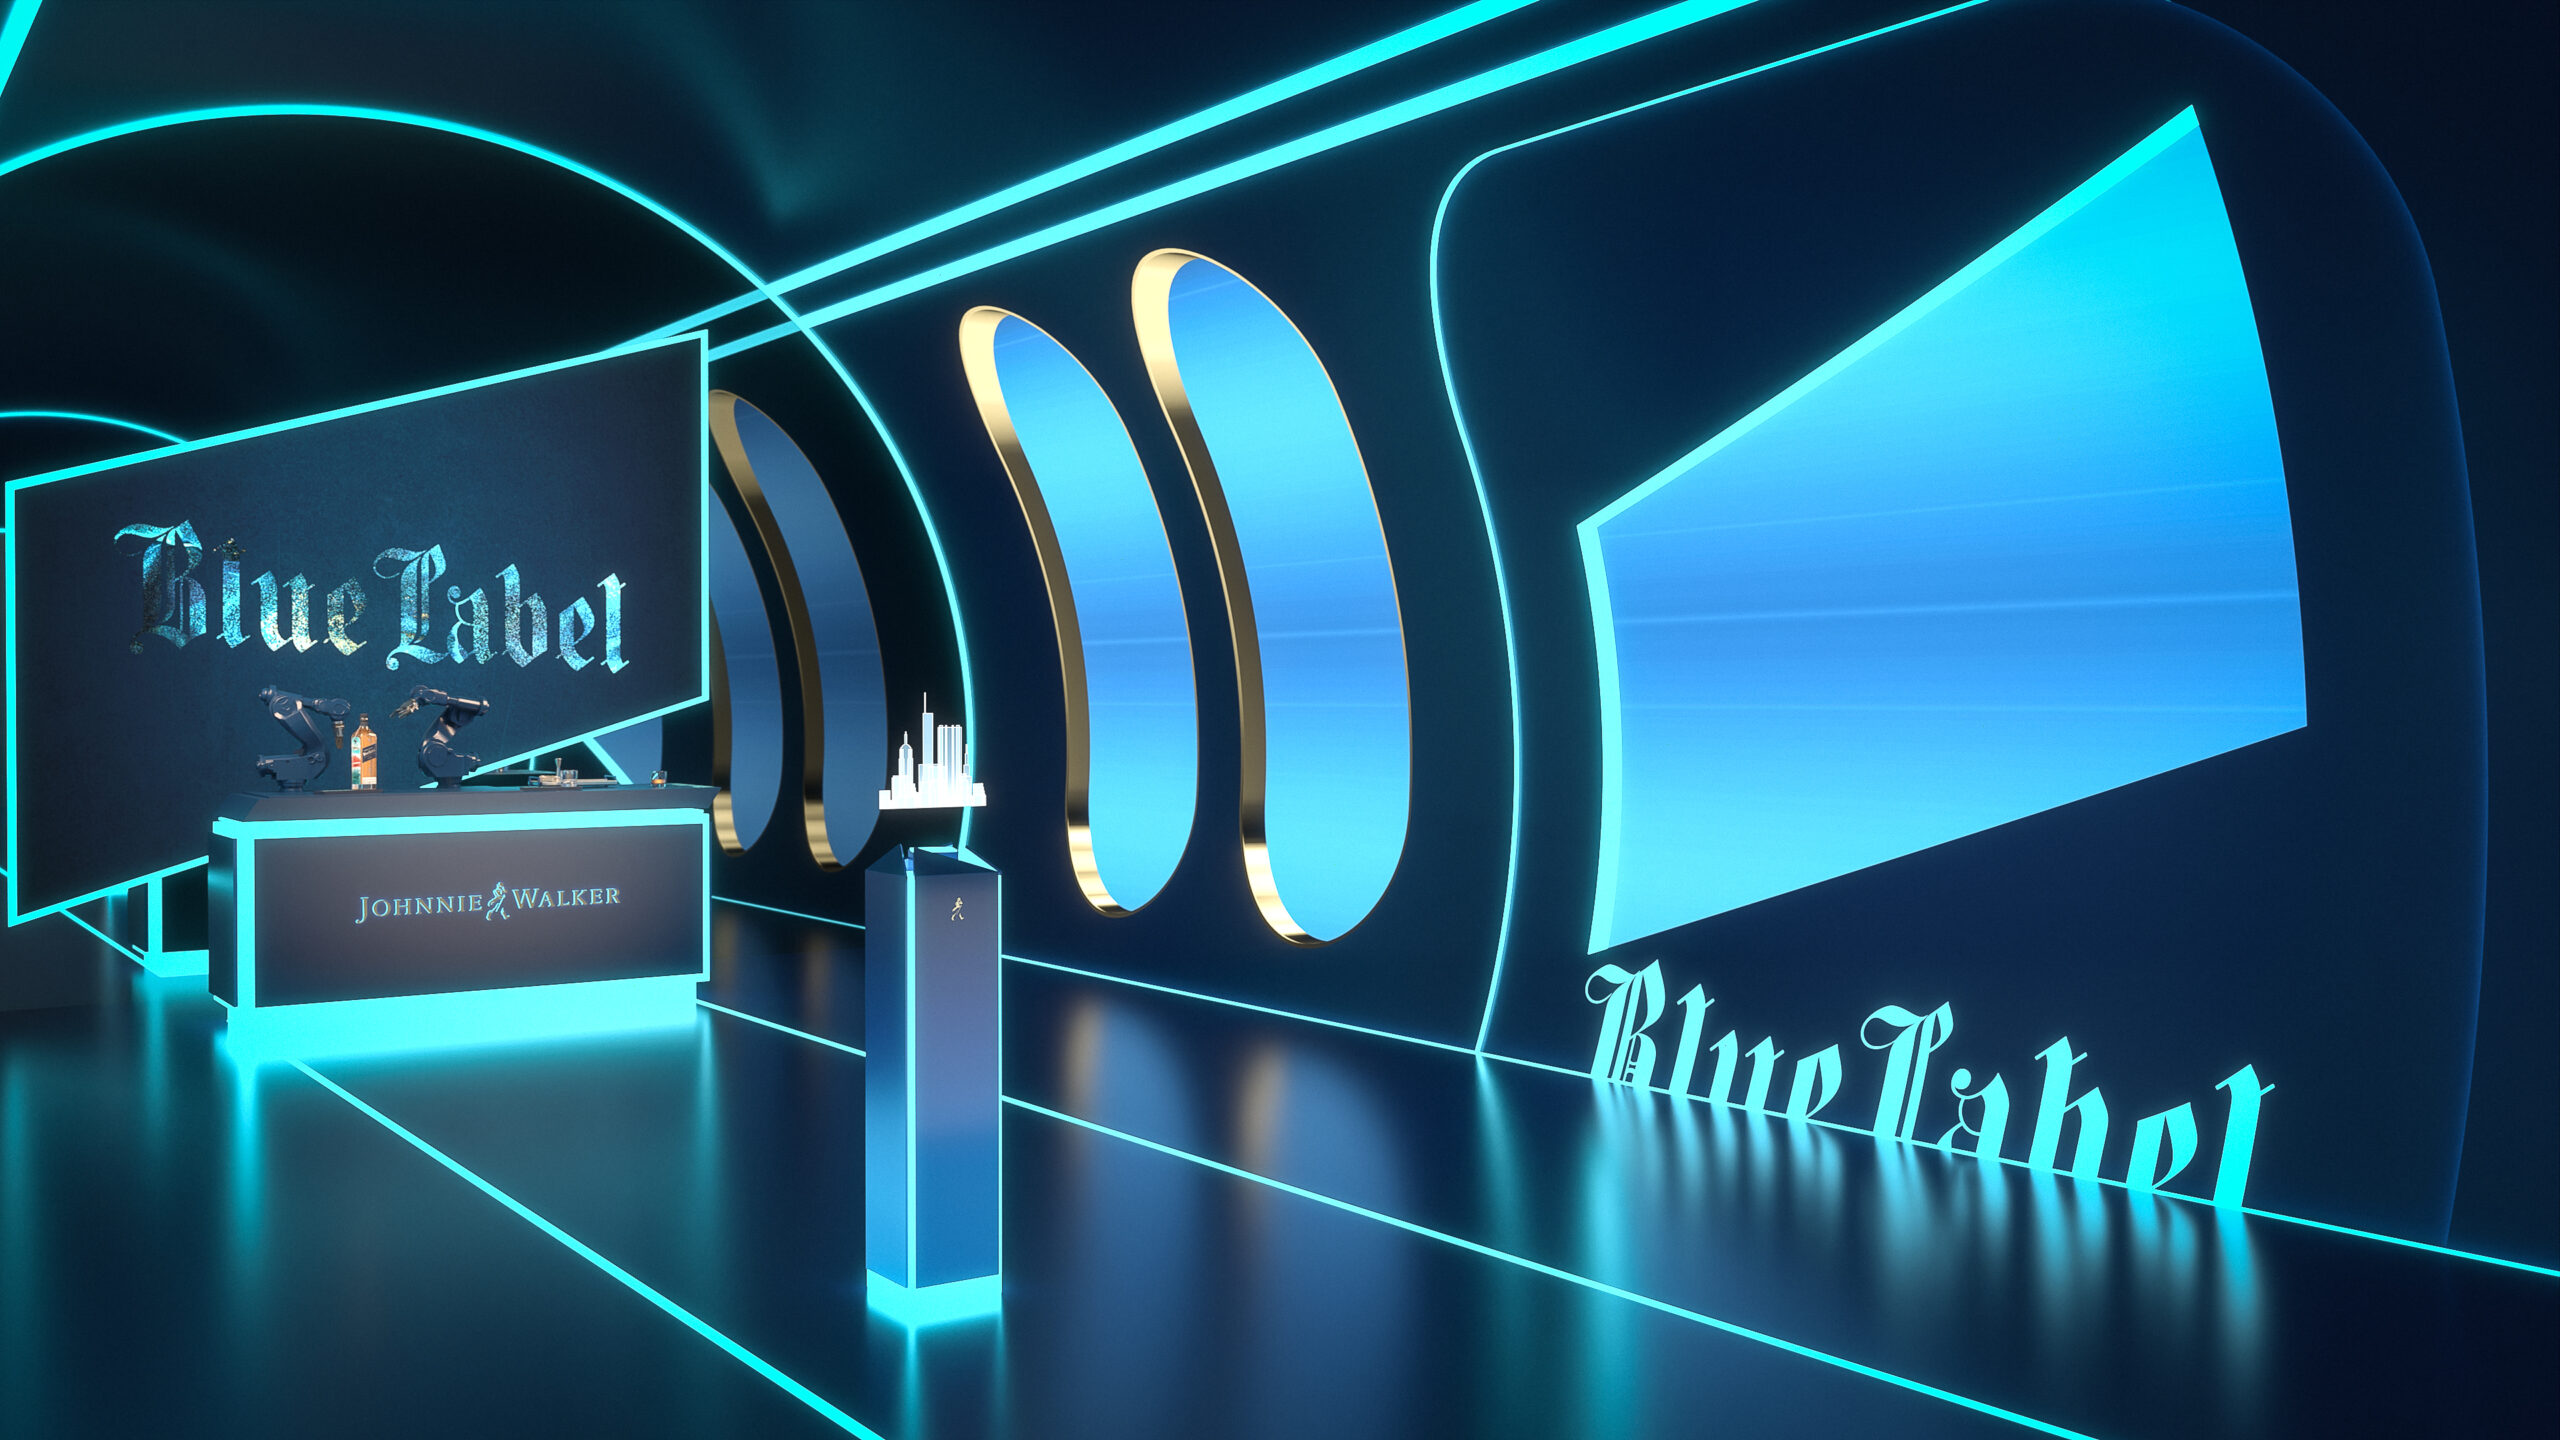 johnnie walker blue label cities future moyosa spaces virtual gallery